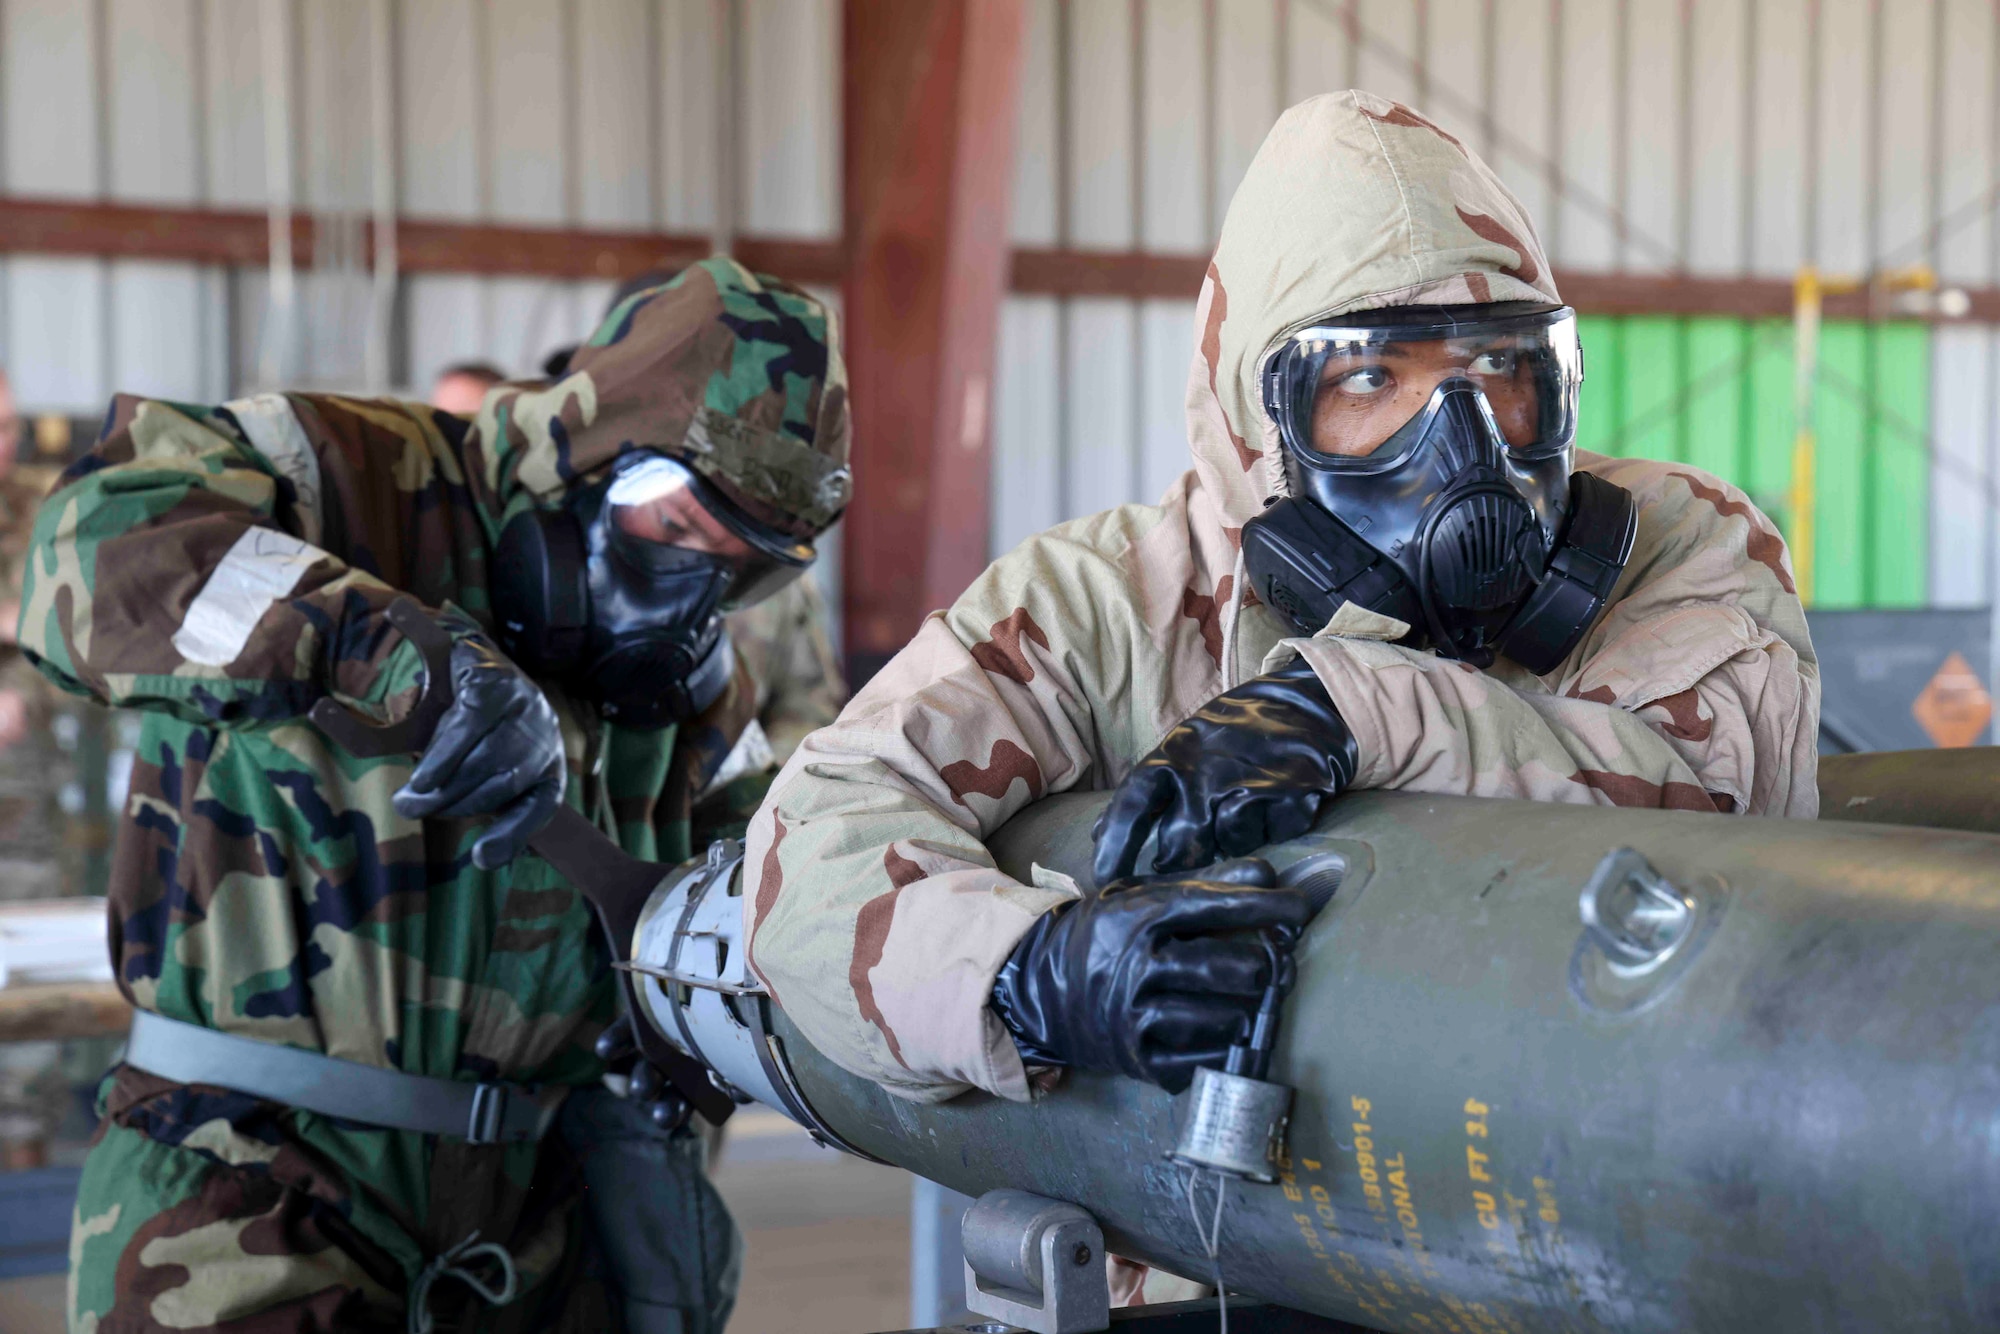 U.S. Air Force Airmen from Whiteman Air Force Base, Missouri, 509th Munitions Squadron, build GBU-54 munitions in MOPP gear to simulate building munitions even in the event of a CBRN attack during the Air Force Combat Operations Competition, Aug. 23, 2023, at Beale AFB, California.